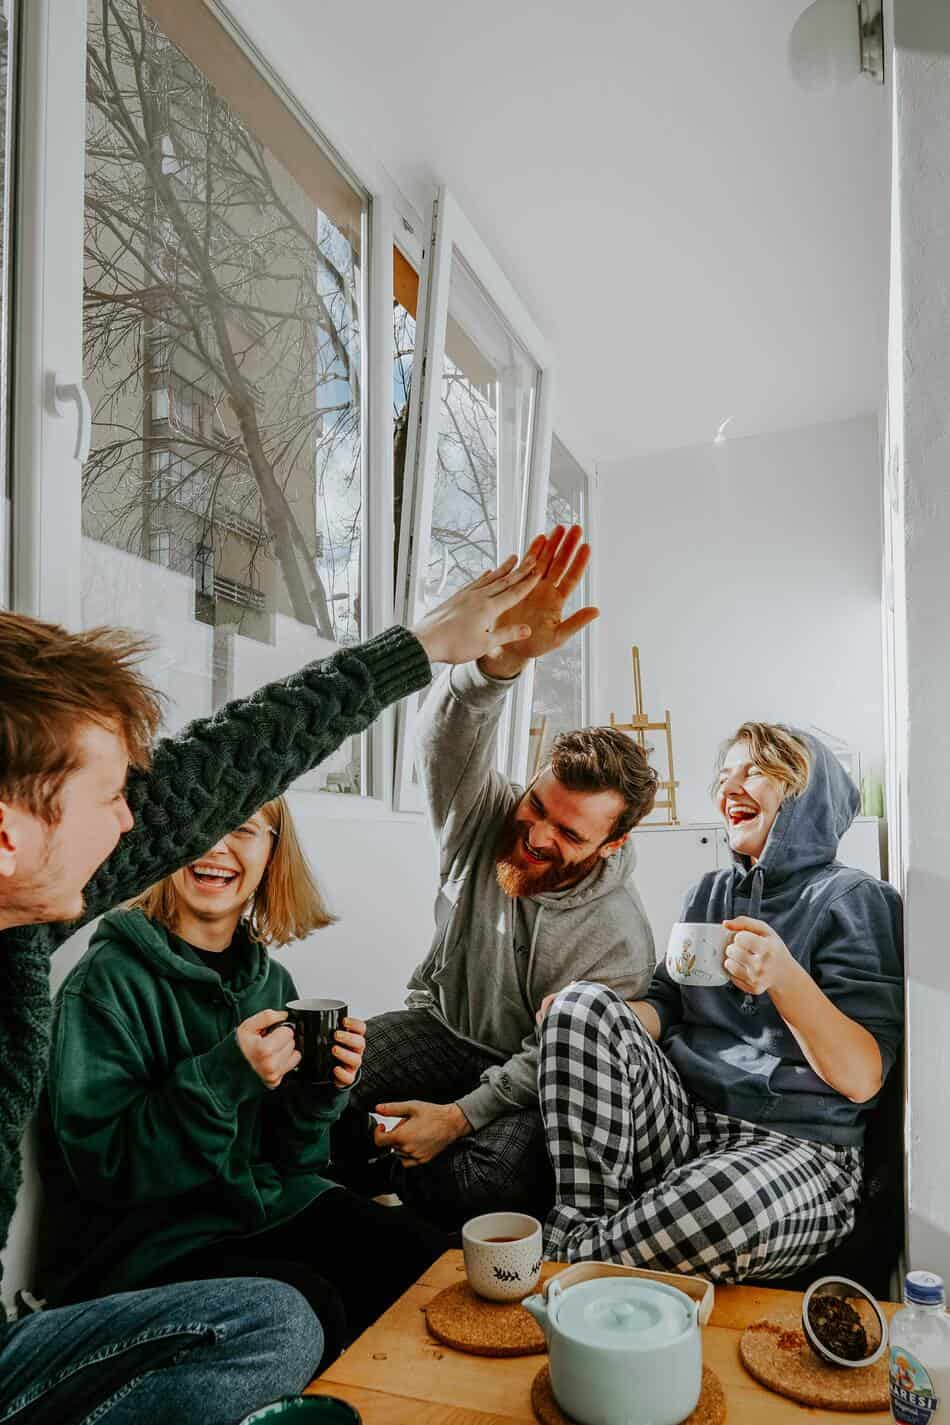 group of friends laughing and having fun together over tea